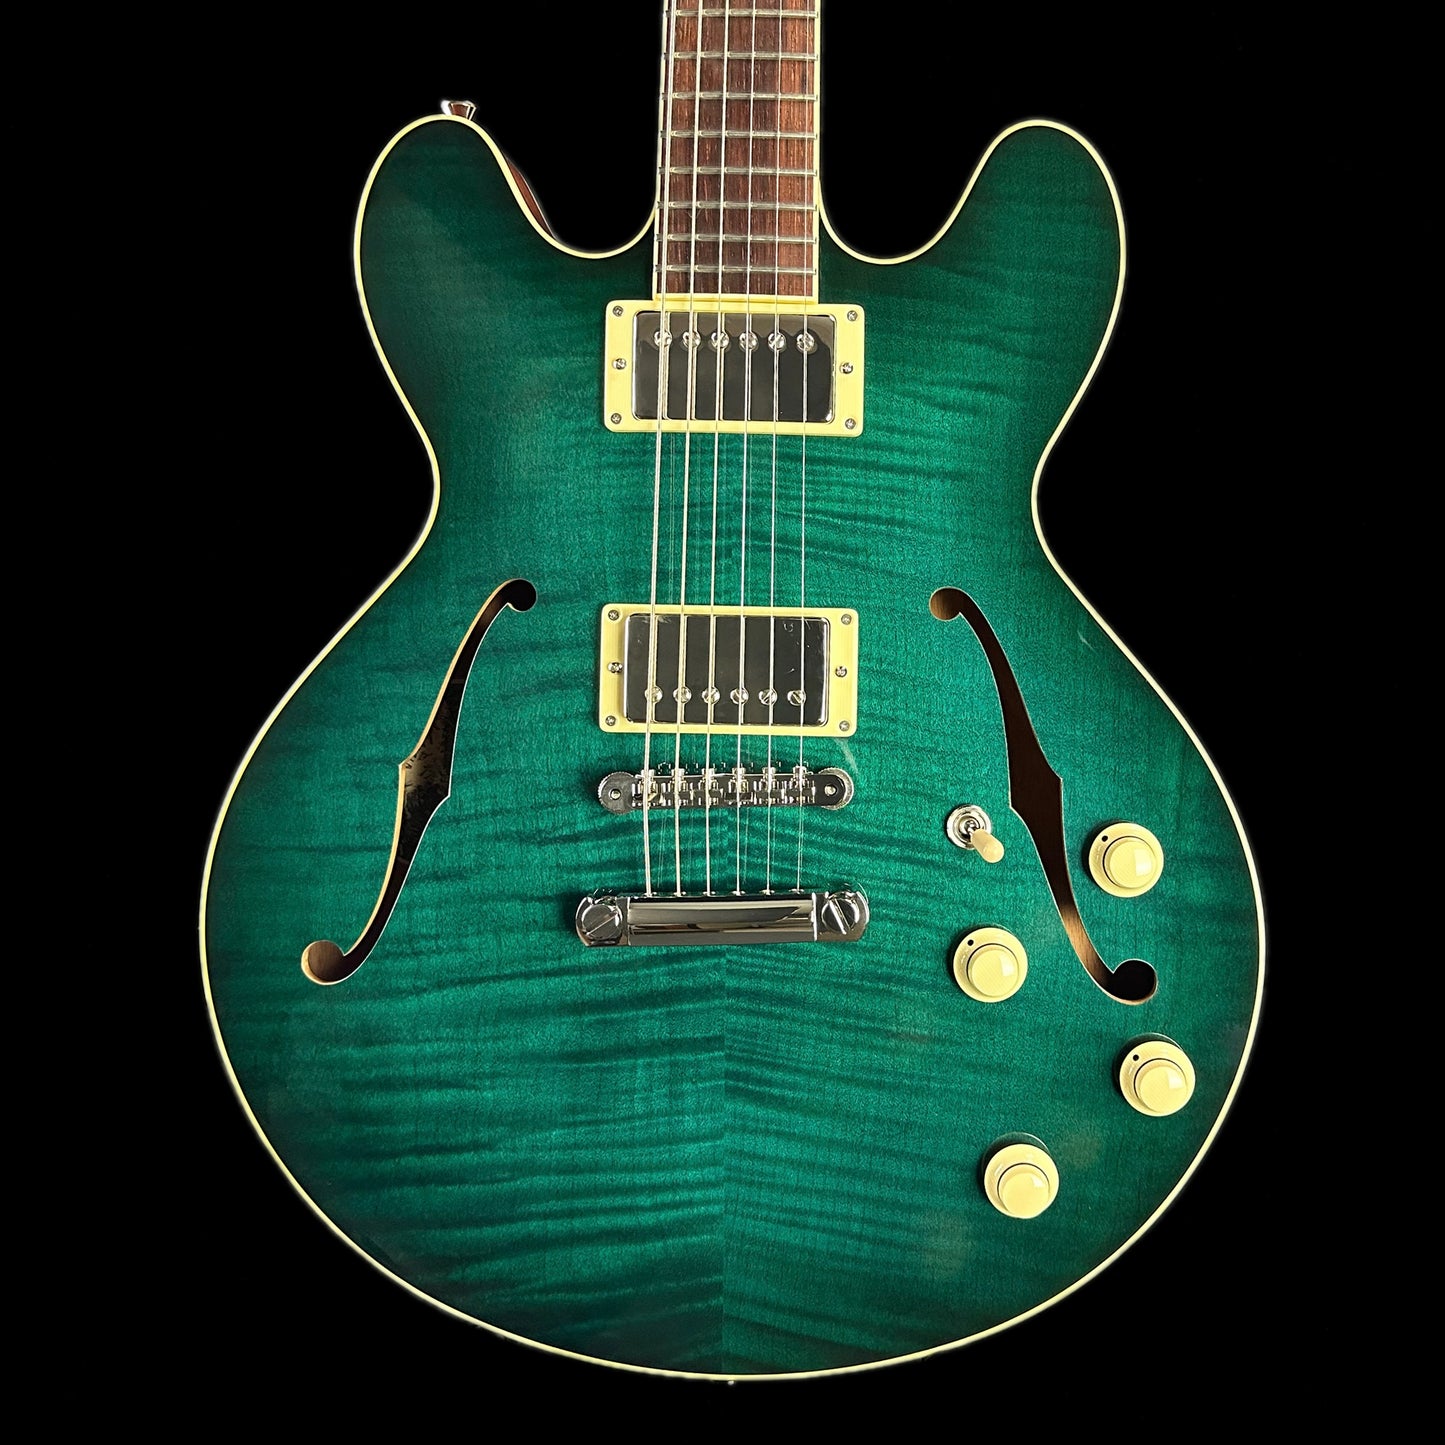 Front of Collings I-35 Deluxe Mermaid Blue Flame Top ThroBaks.